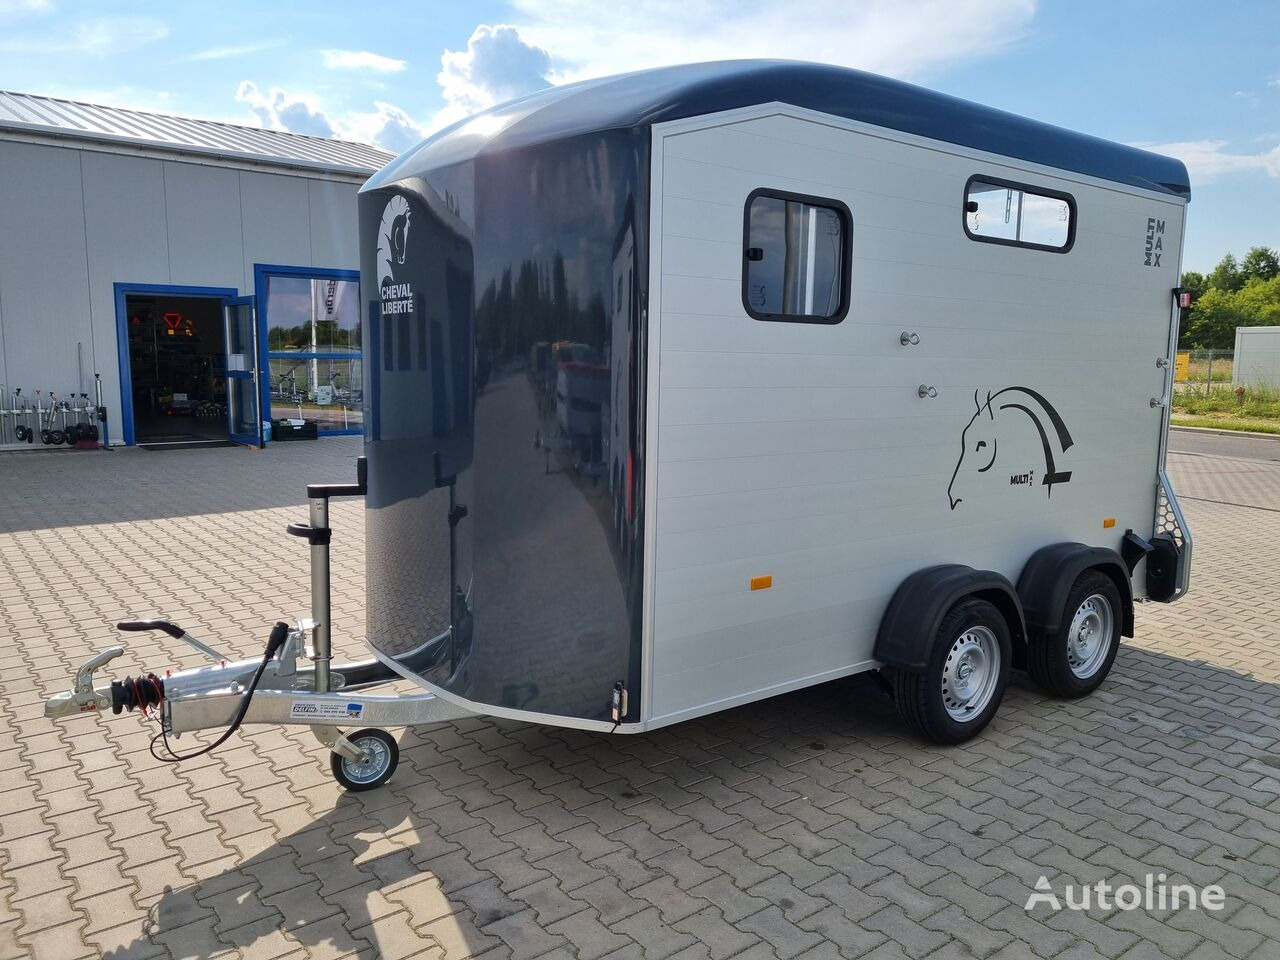 New Horse trailer Cheval Liberté Multimax trailer for 2 horses GVW 2600kg big tack room saddle: picture 8